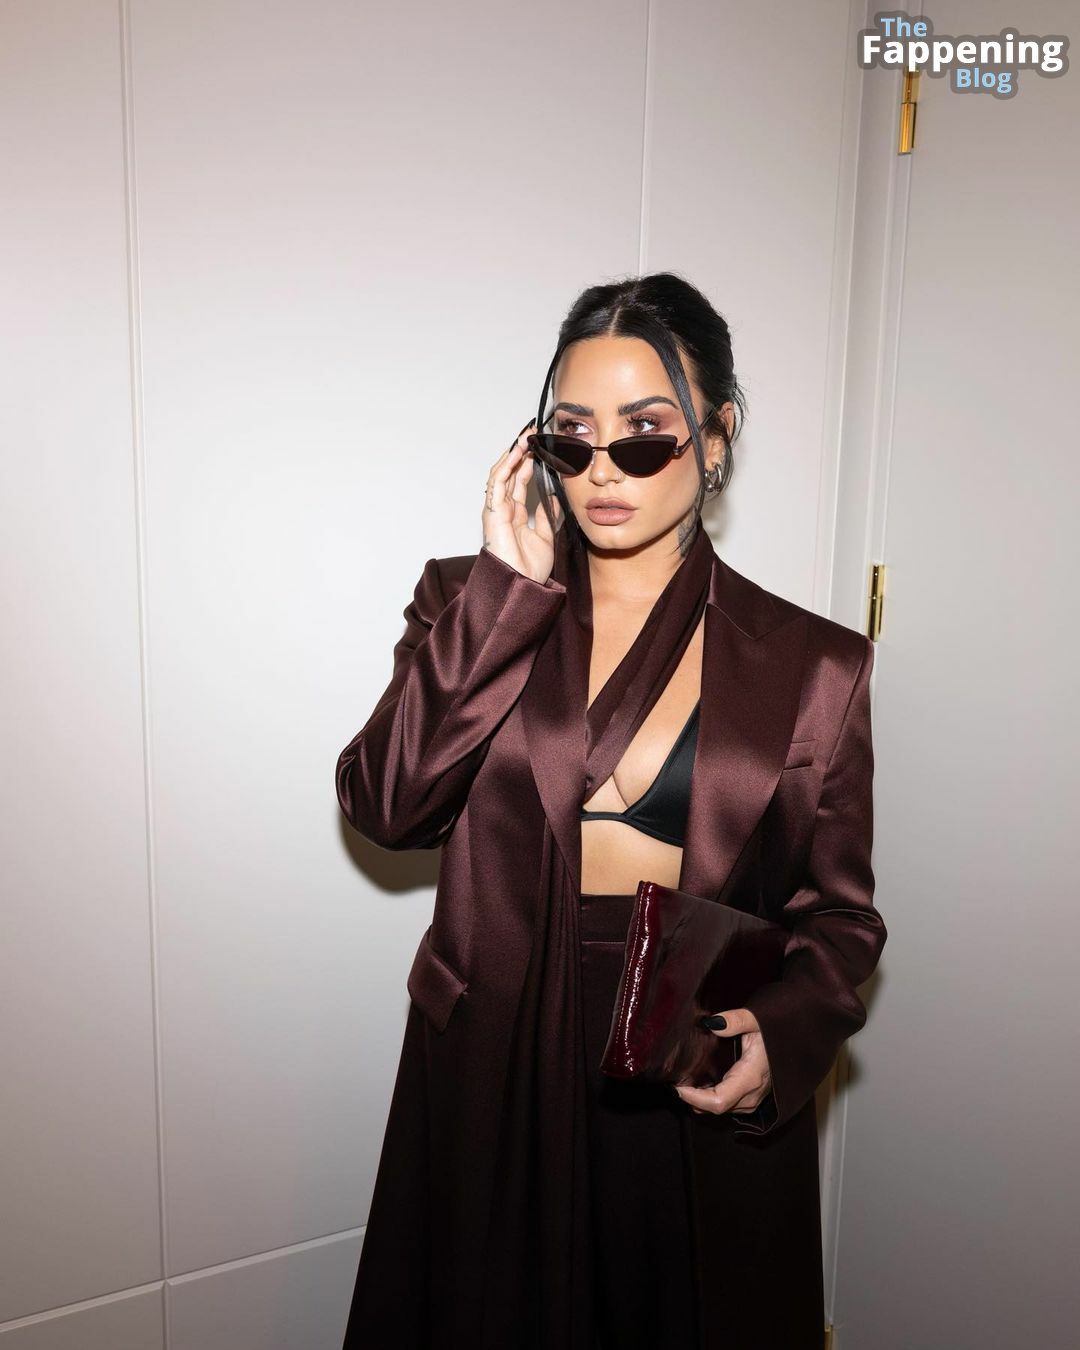 Demi Lovato Displays Her Sexy Tits at the Boss Fashion Show (12 Photos)